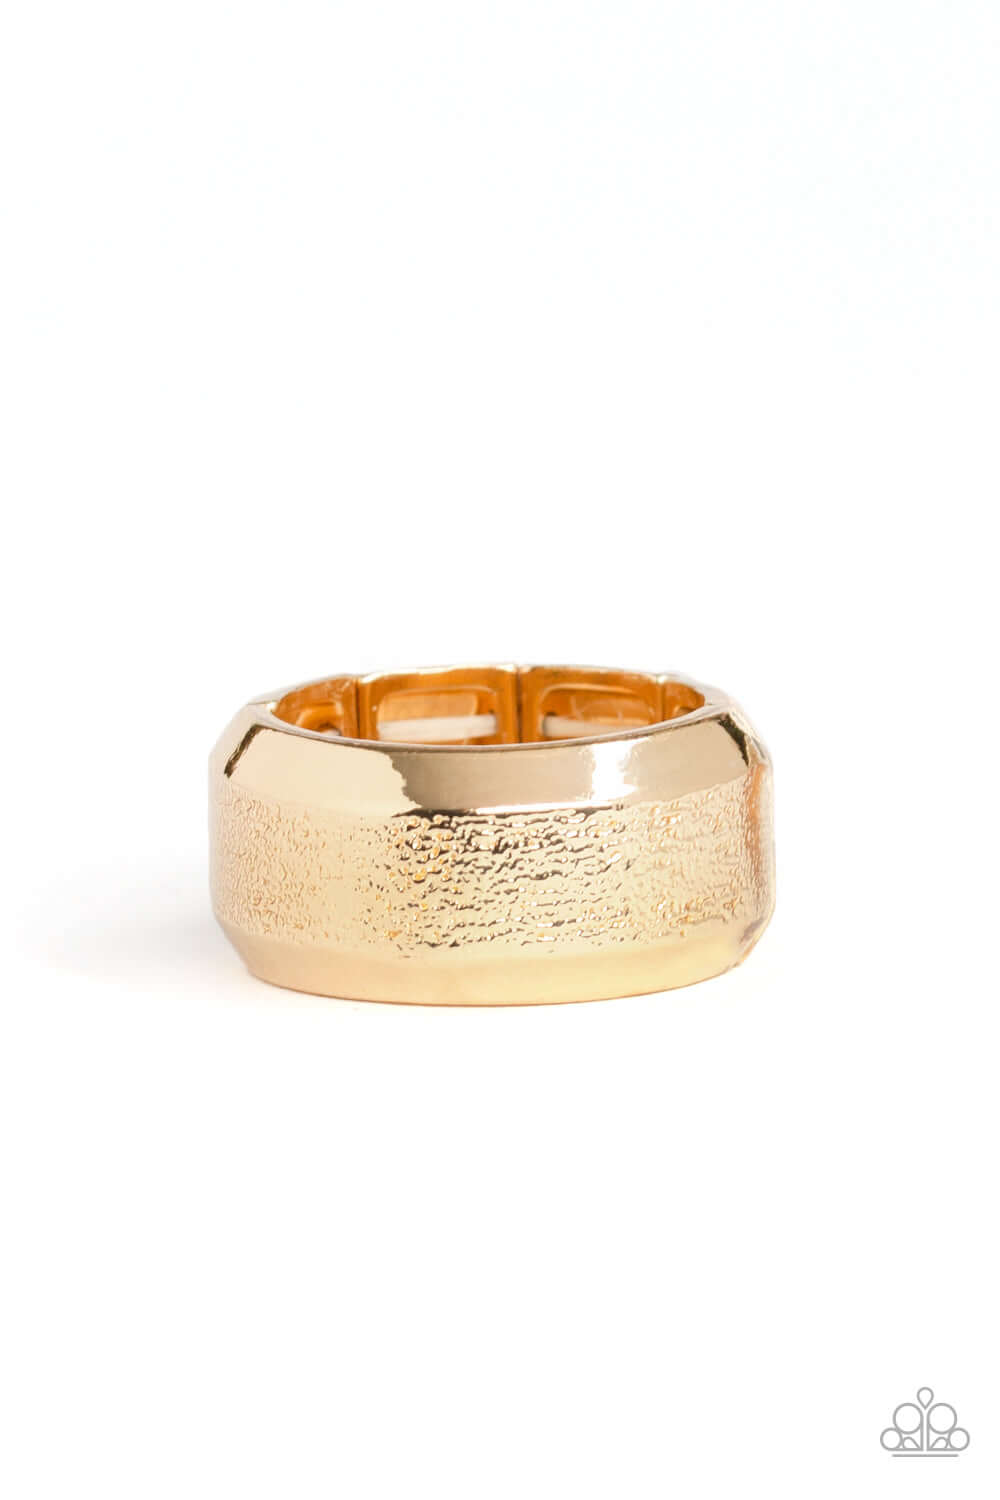 Checkmate - Gold Urban Ring - TheMasterCollection